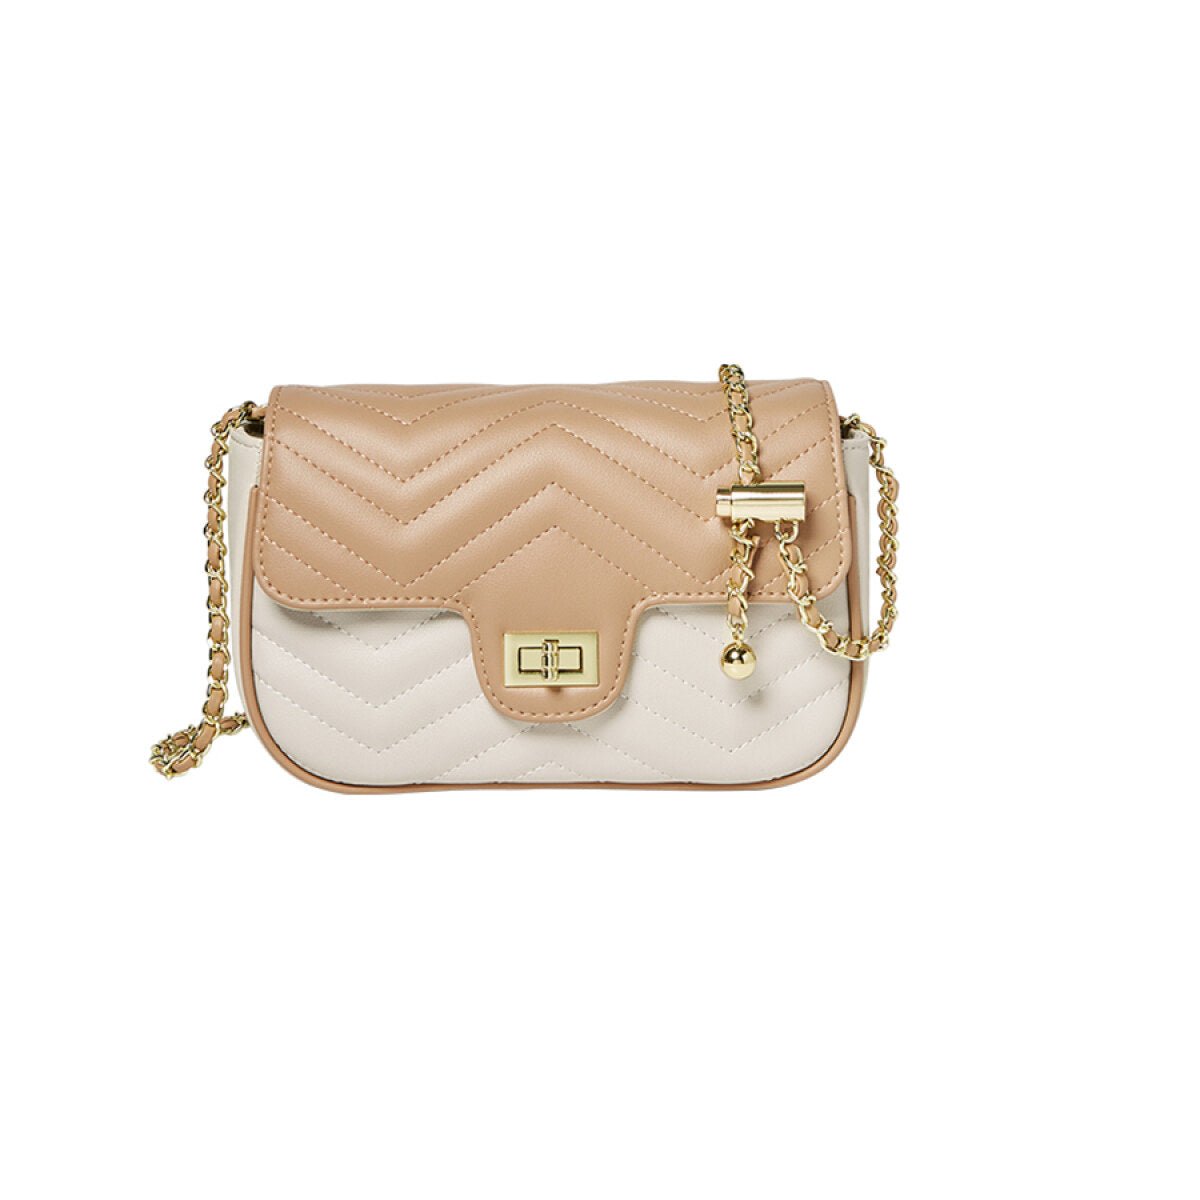 Apricot Ivy Chain Leather Shoulder Bag